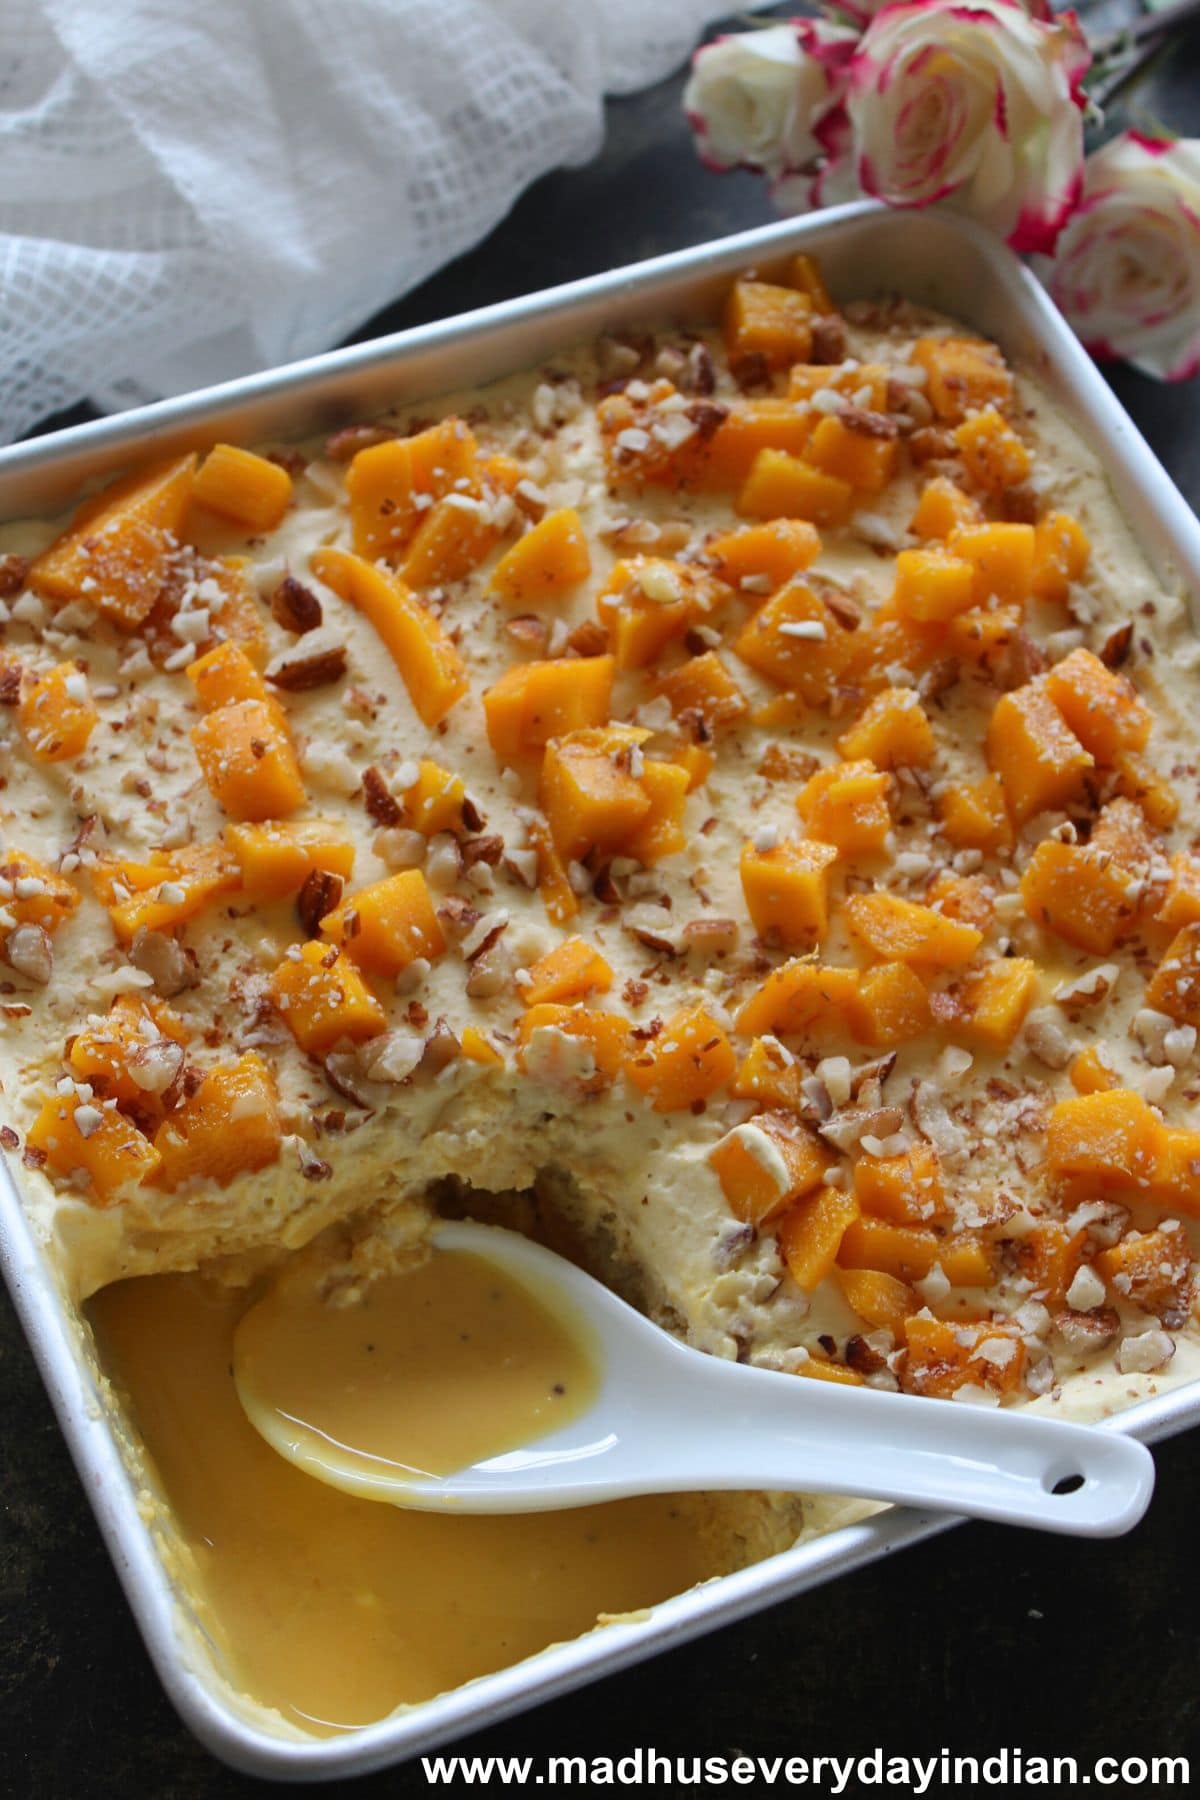 mango tres leches cake served in a tray with a spoon